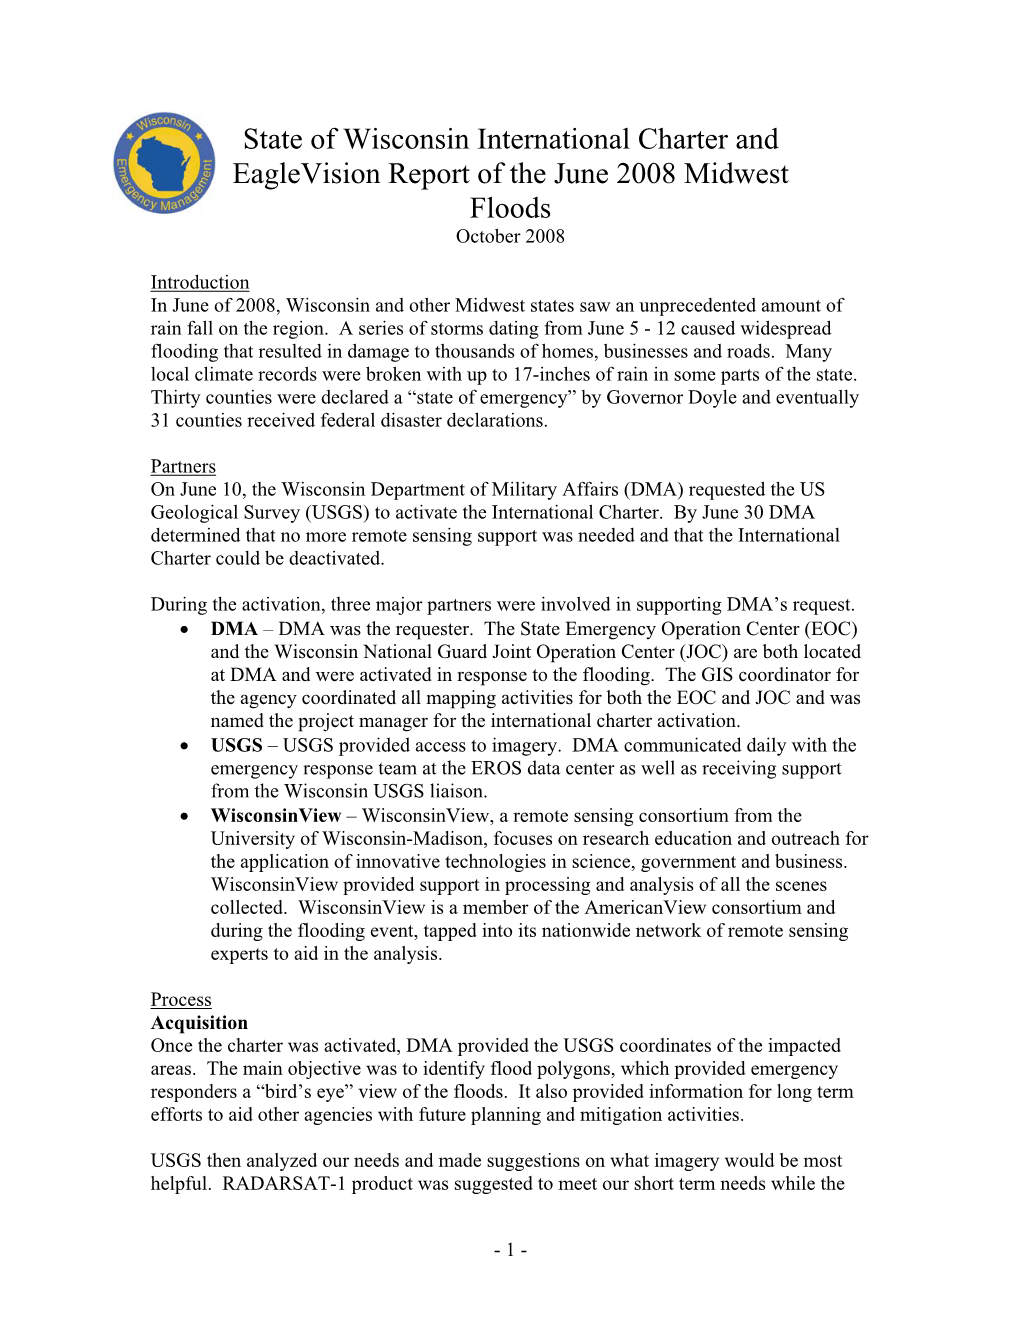 State of Wisconsin International Charter and Eaglevision Report of the June 2008 Midwest Floods October 2008